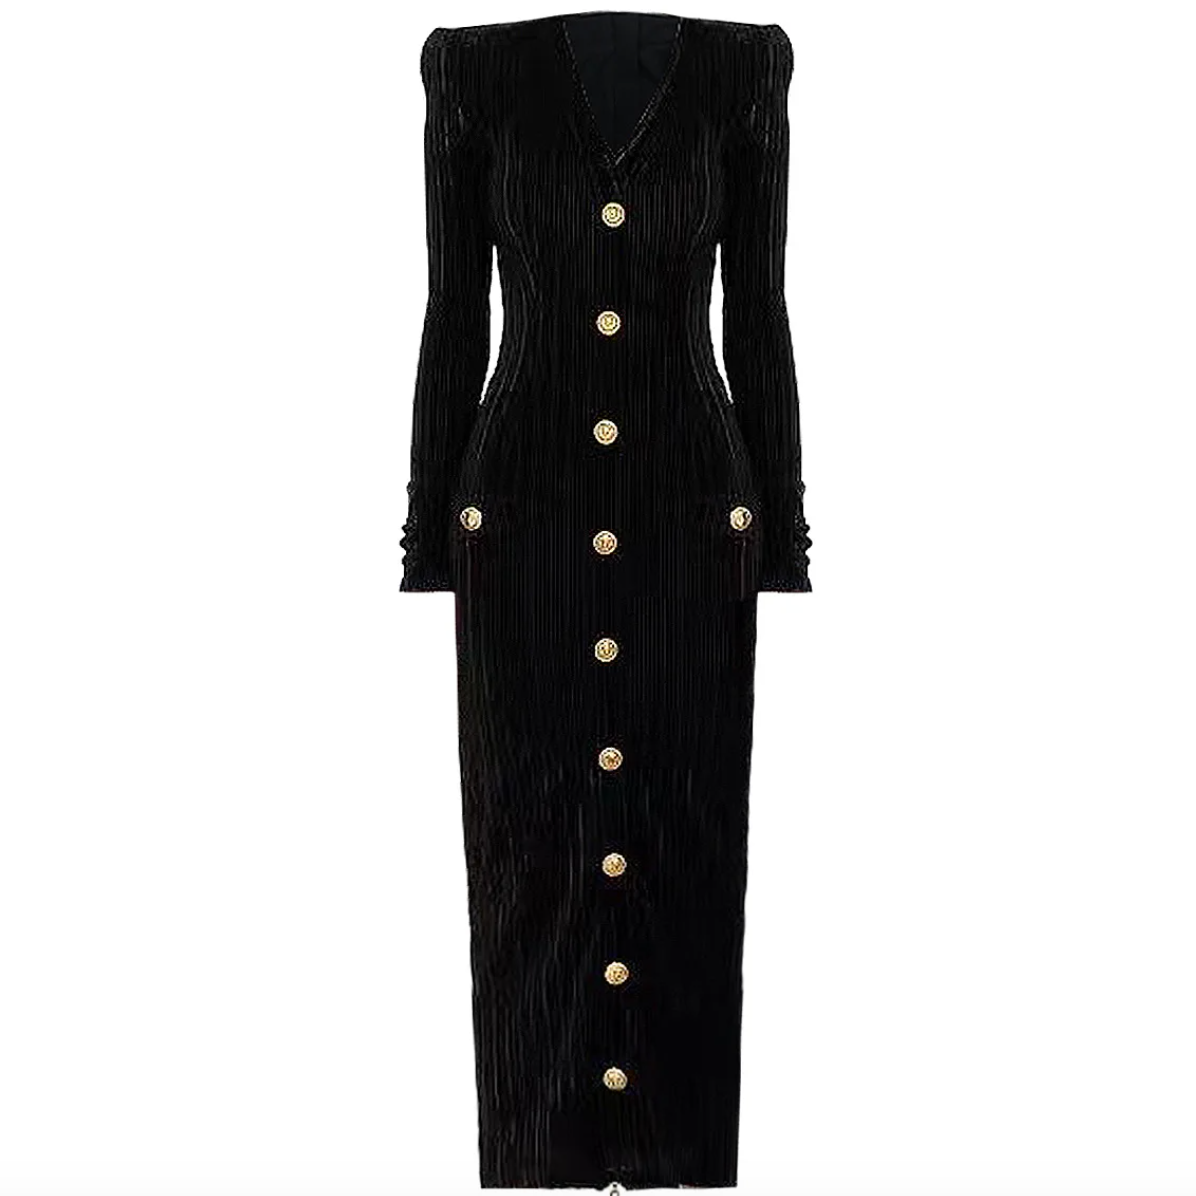 The Natalynska Bruletova dress is an elegant velvet, gold button detail, midi dress with long sleeves, a V neckline and a golden zip at the back. This form fitting dress can be dressed up or down! balmain inspired black